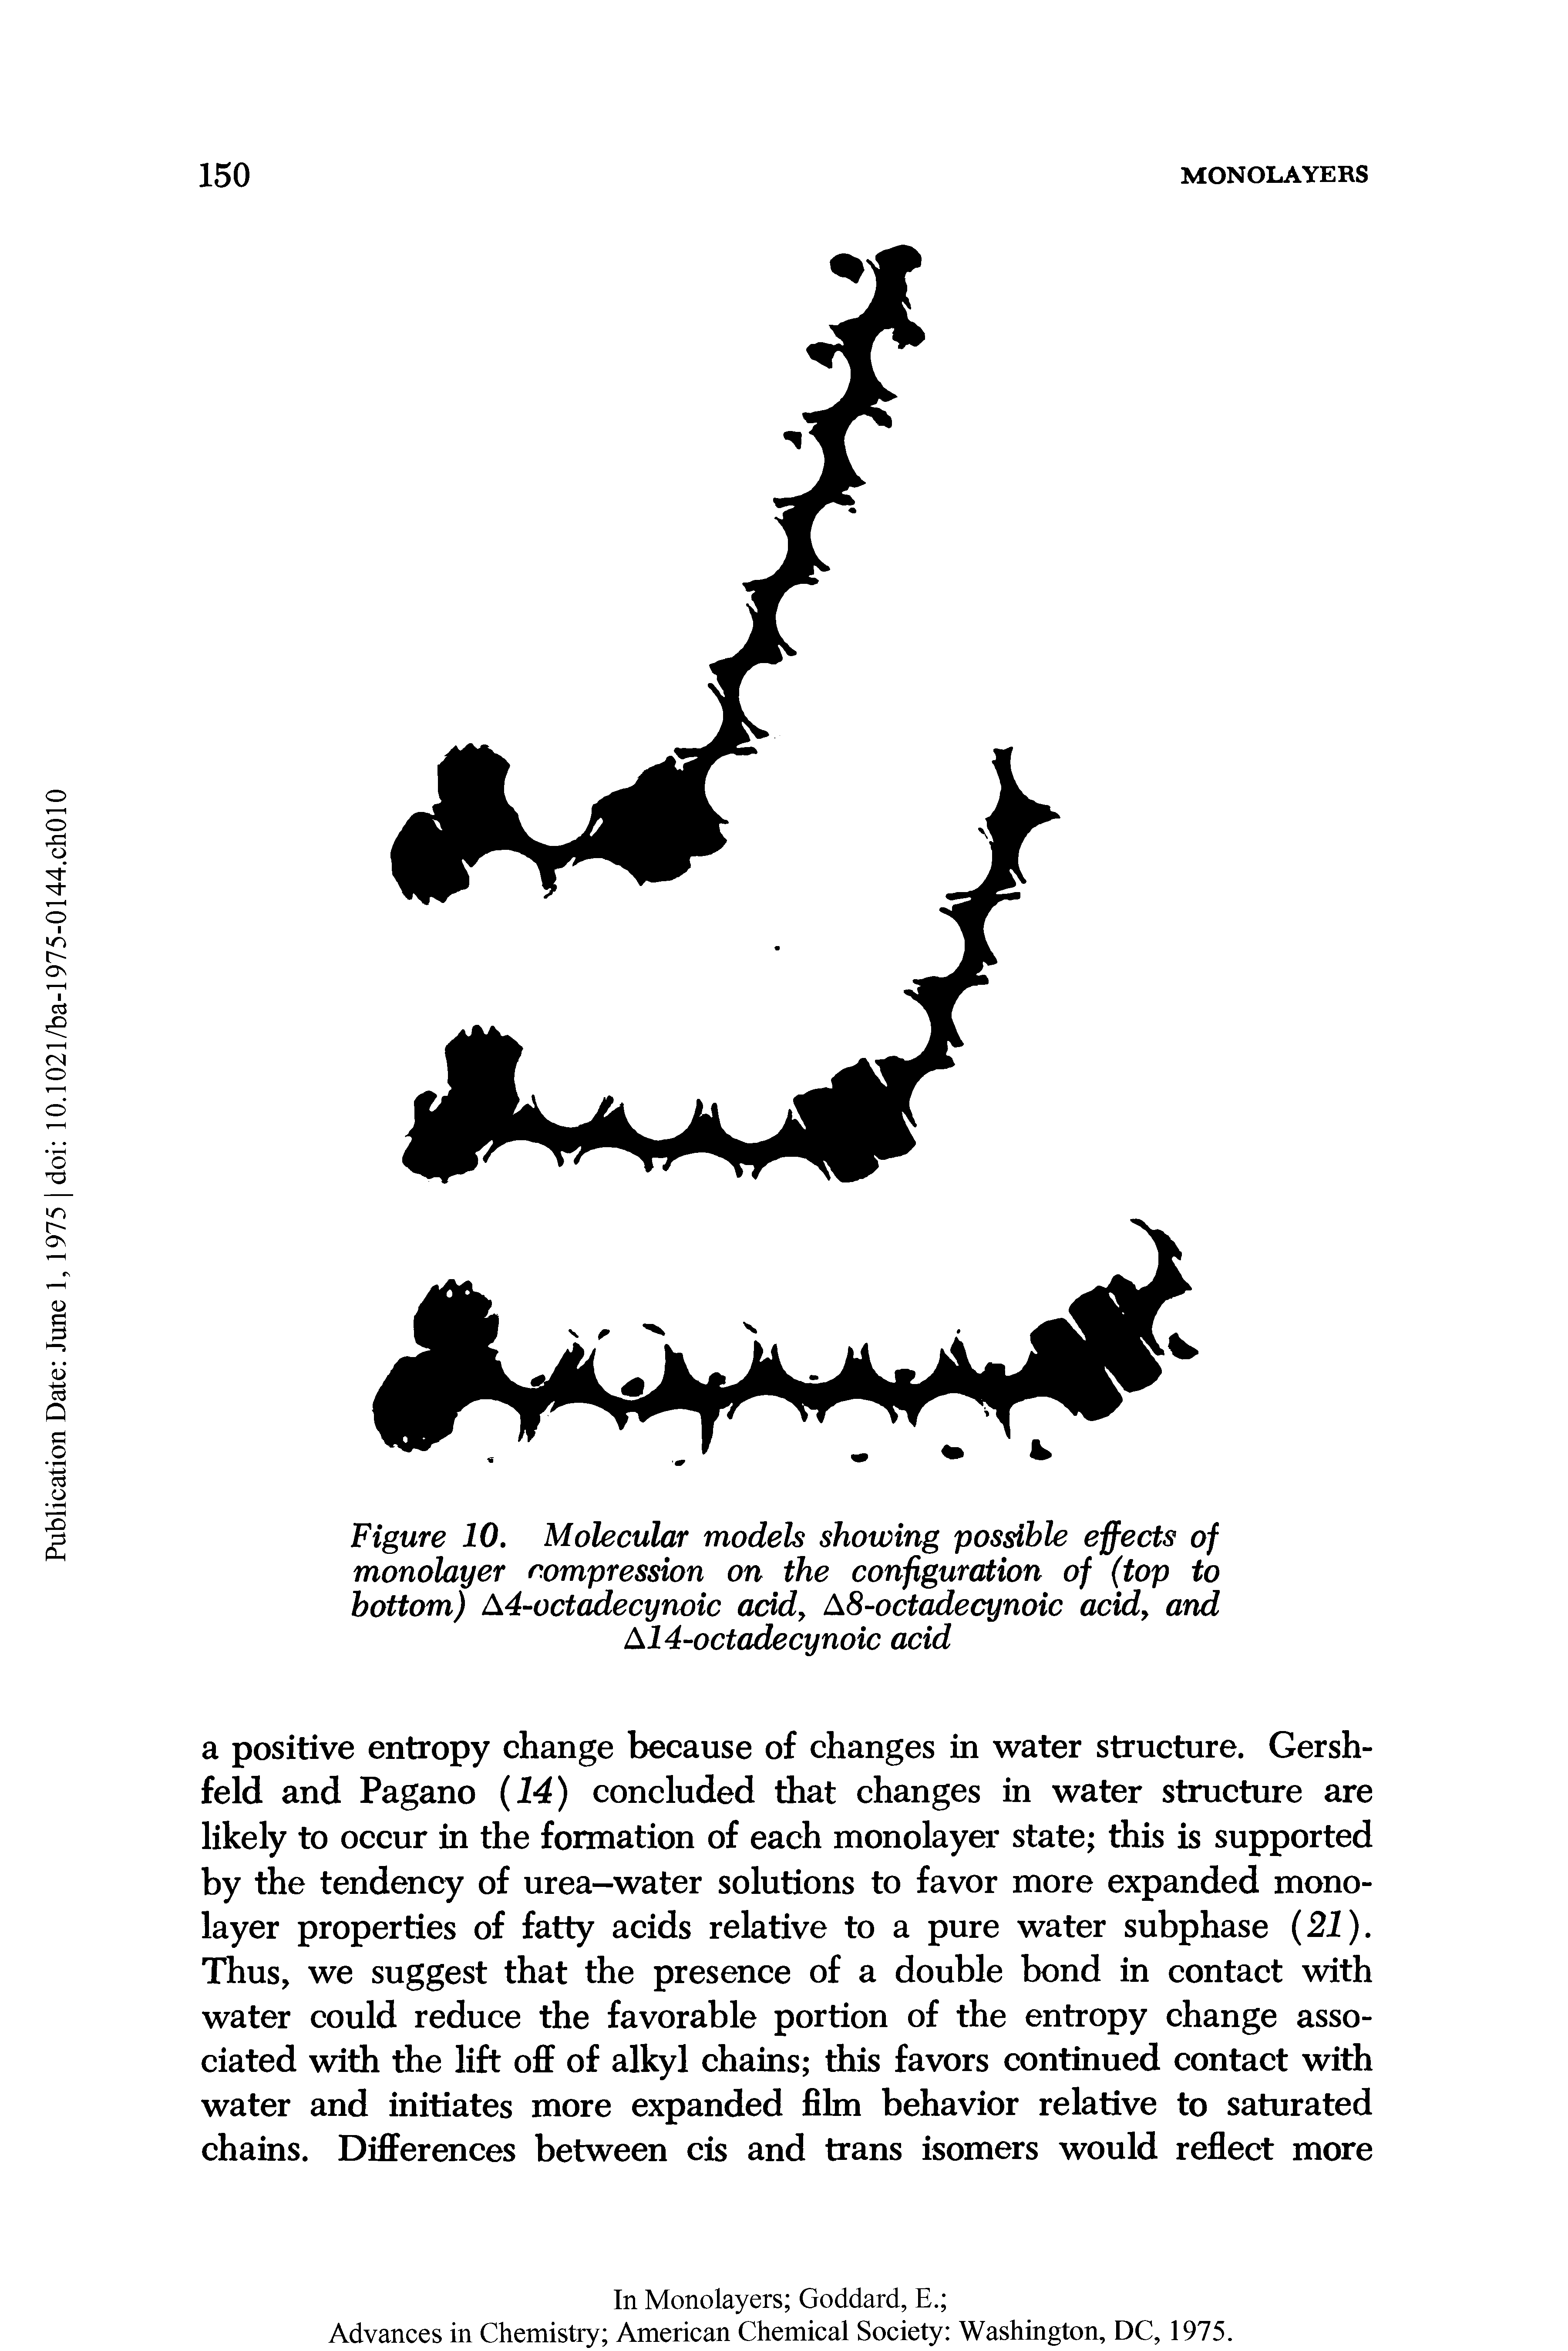 Figure 10. Molecular models showing possible effects of monolayer compression on the configuration of (top to bottom) A4-octadecynoic acid, A8-octadecynoic acid, and A14-octadecynoic acid...